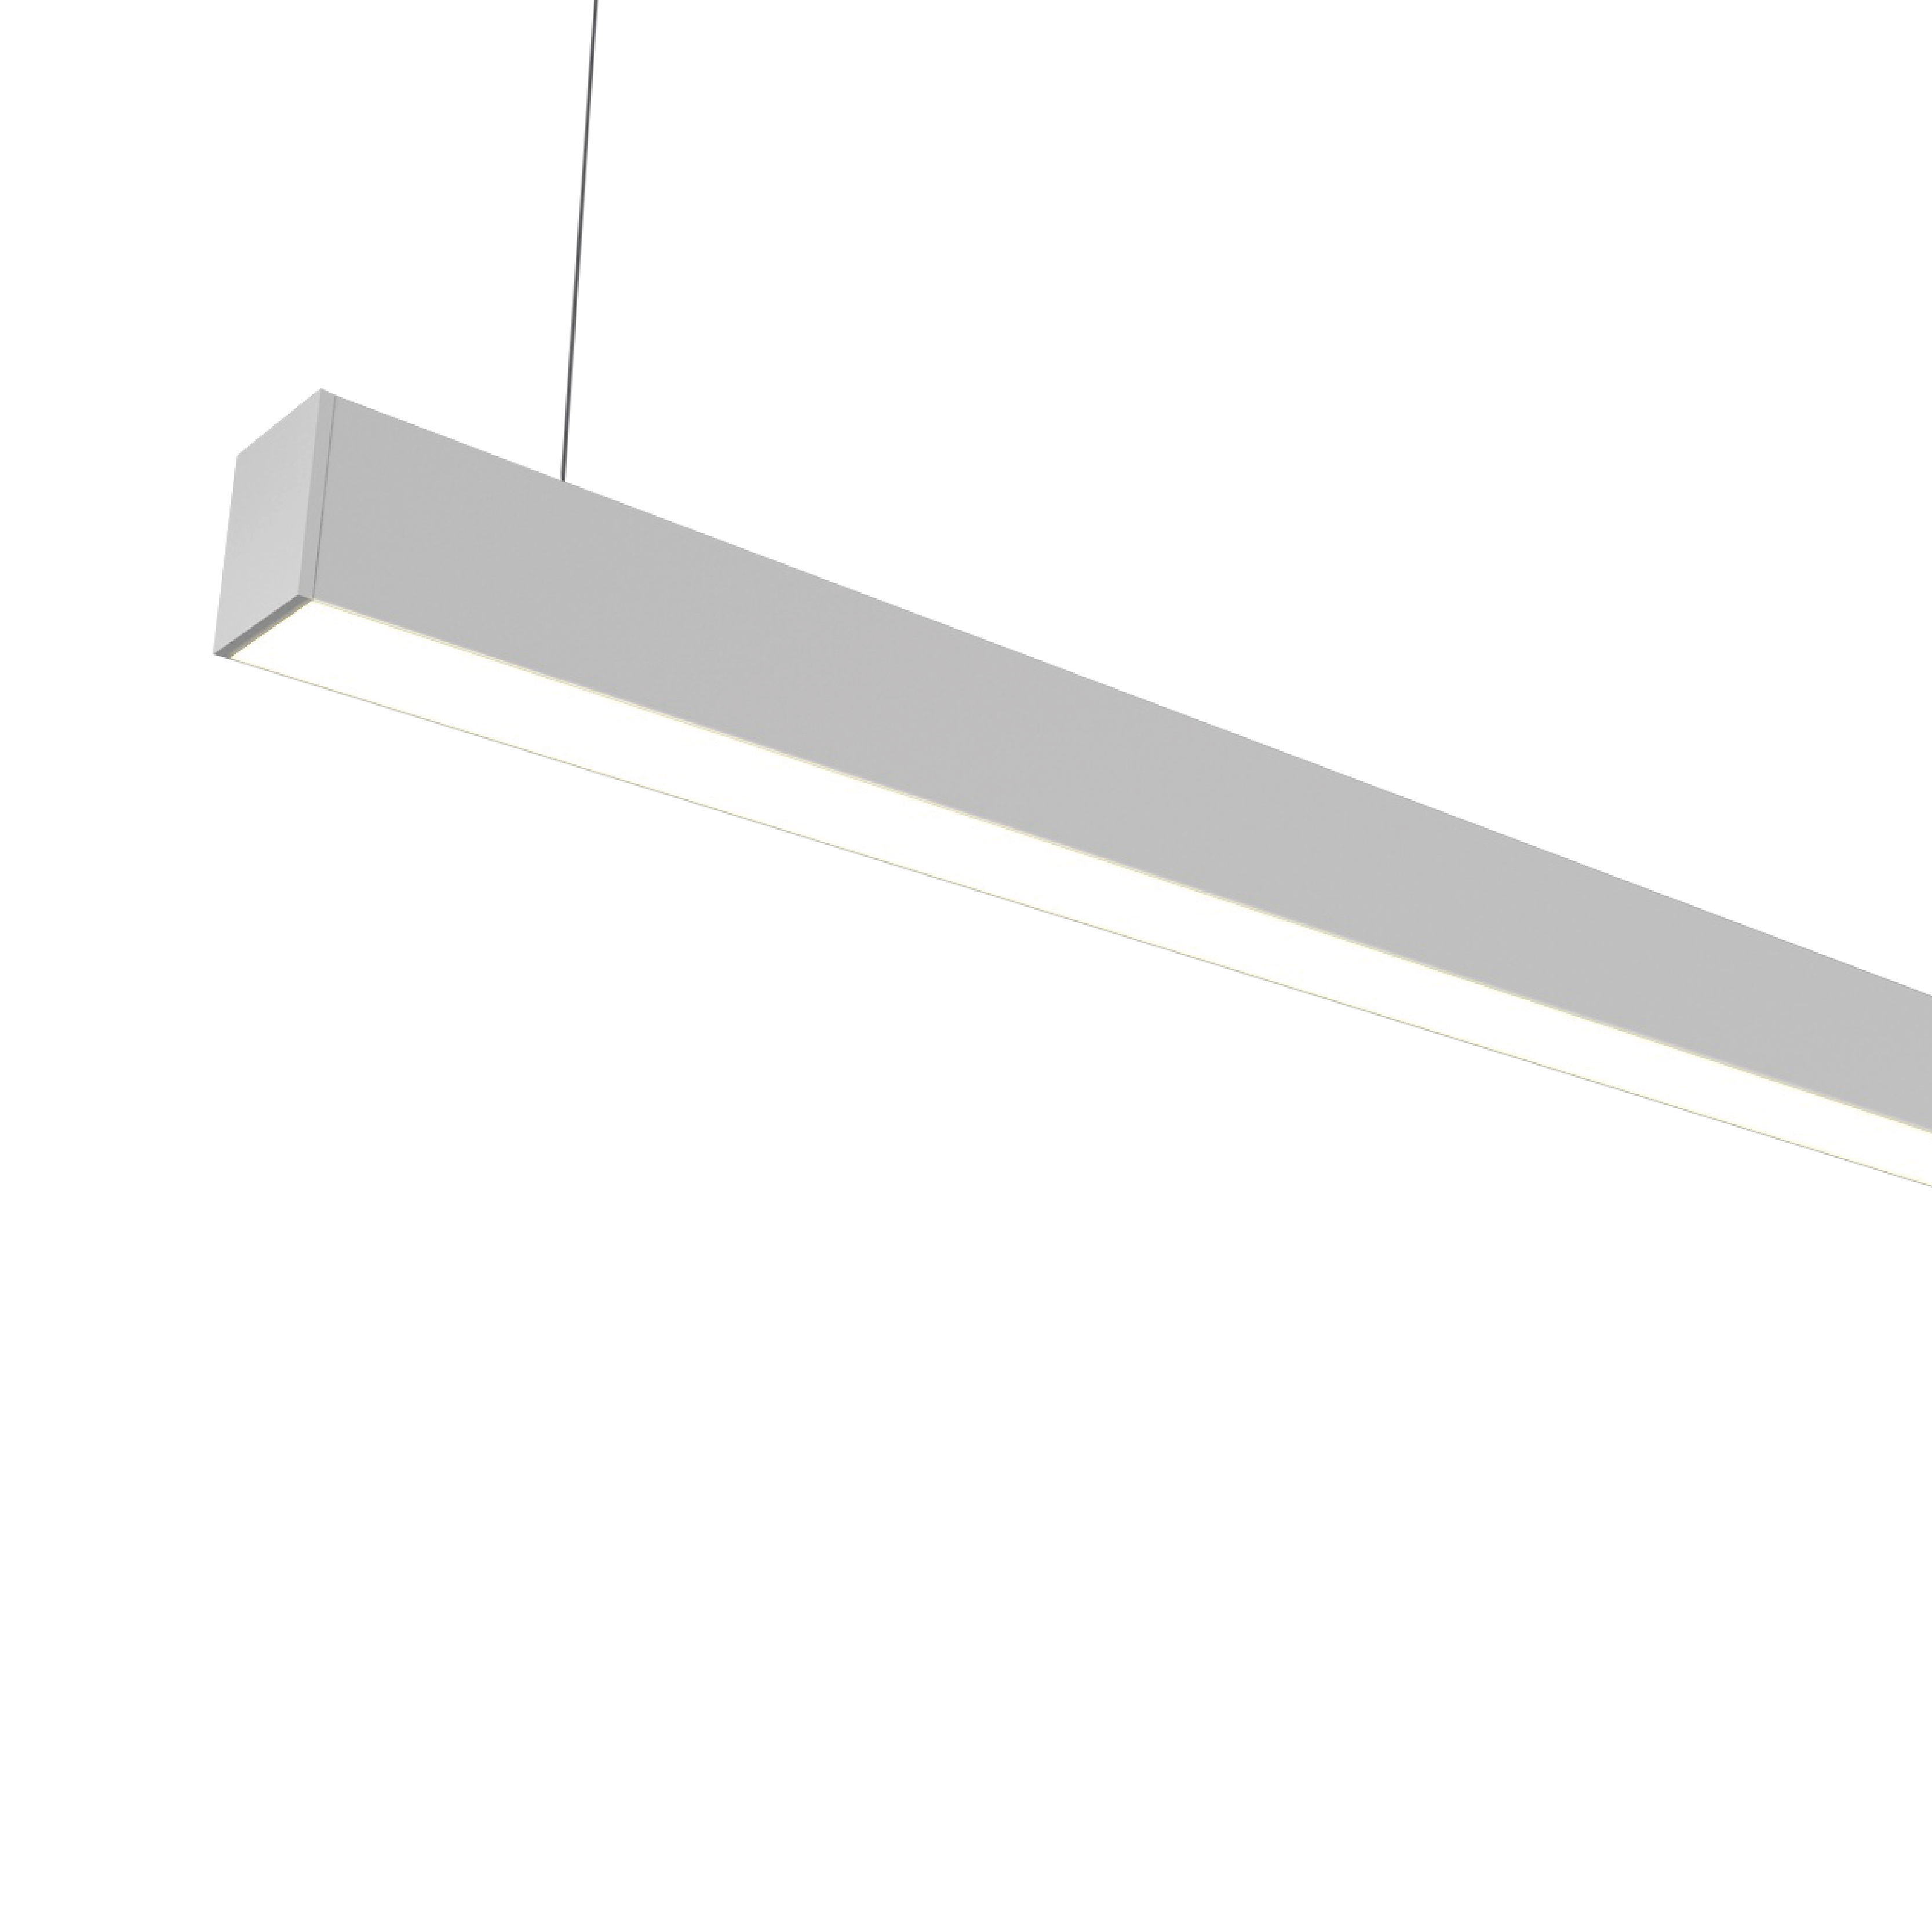 ZOLI-LED Linear Lighting with Advanced Prismatic Lens Technology for Enhanced Illumination and Energy Efficiency